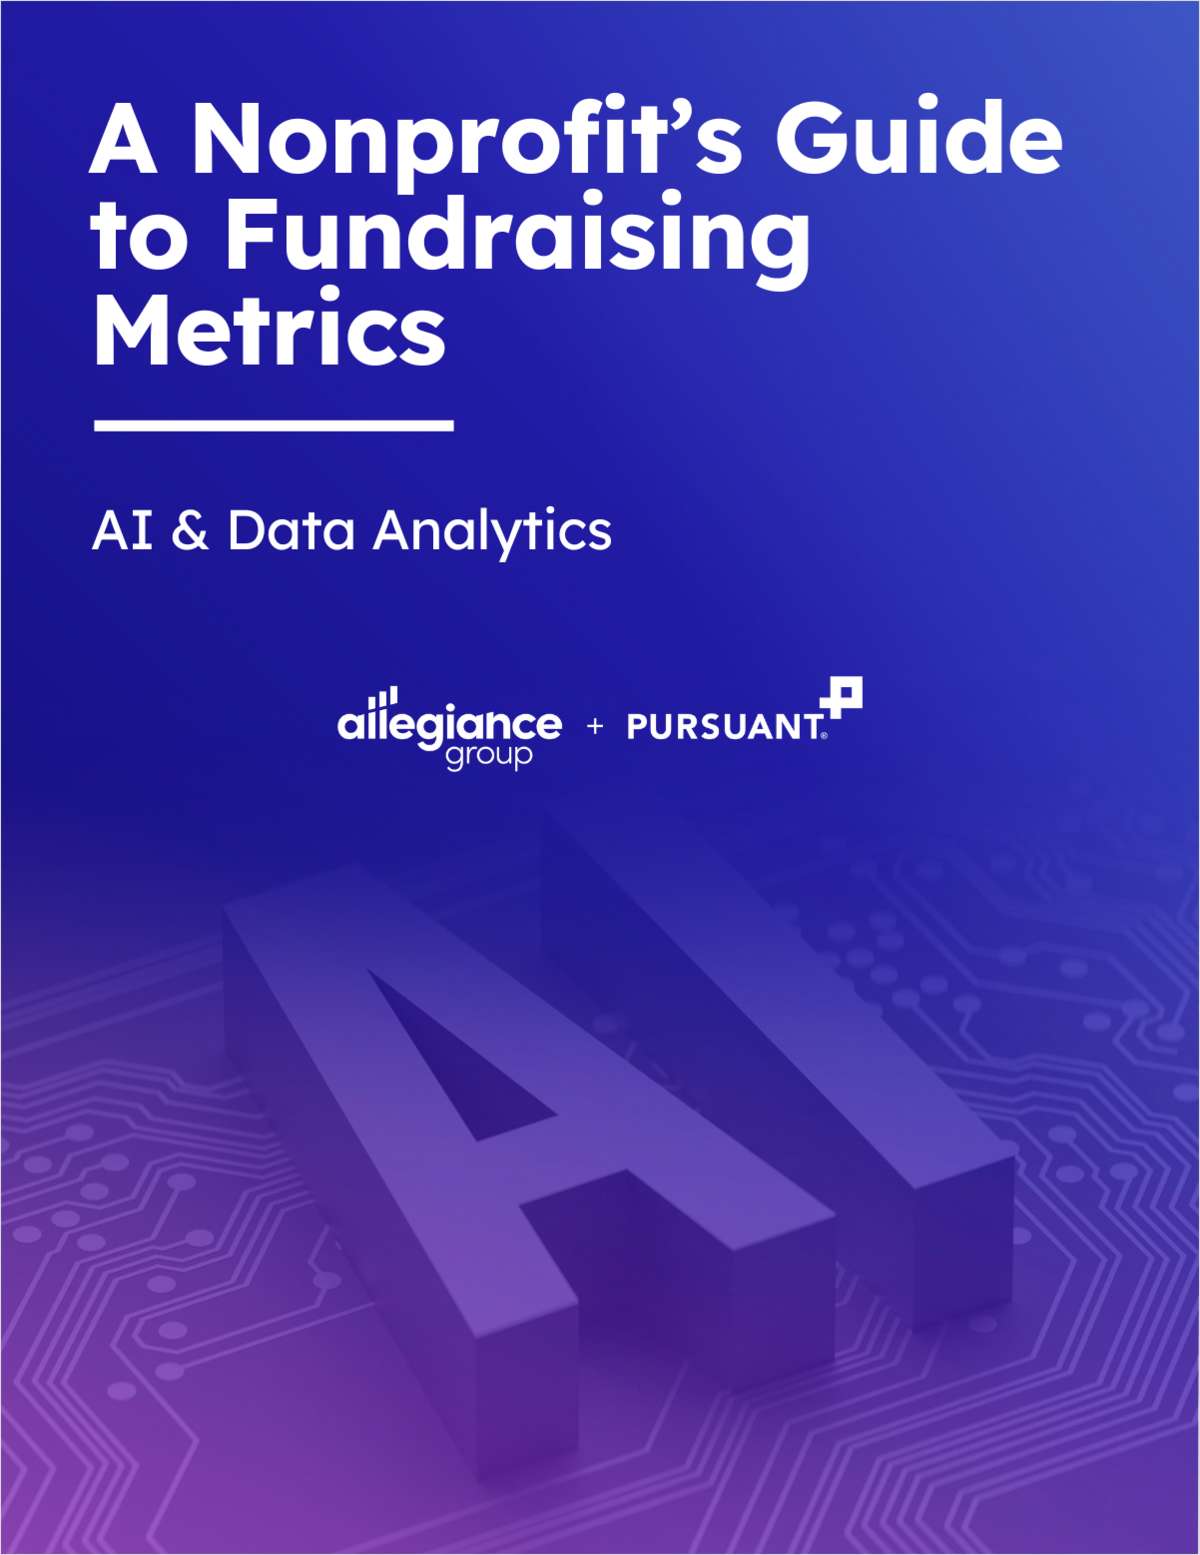 A Nonprofit's Guide to Fundraising Metrics